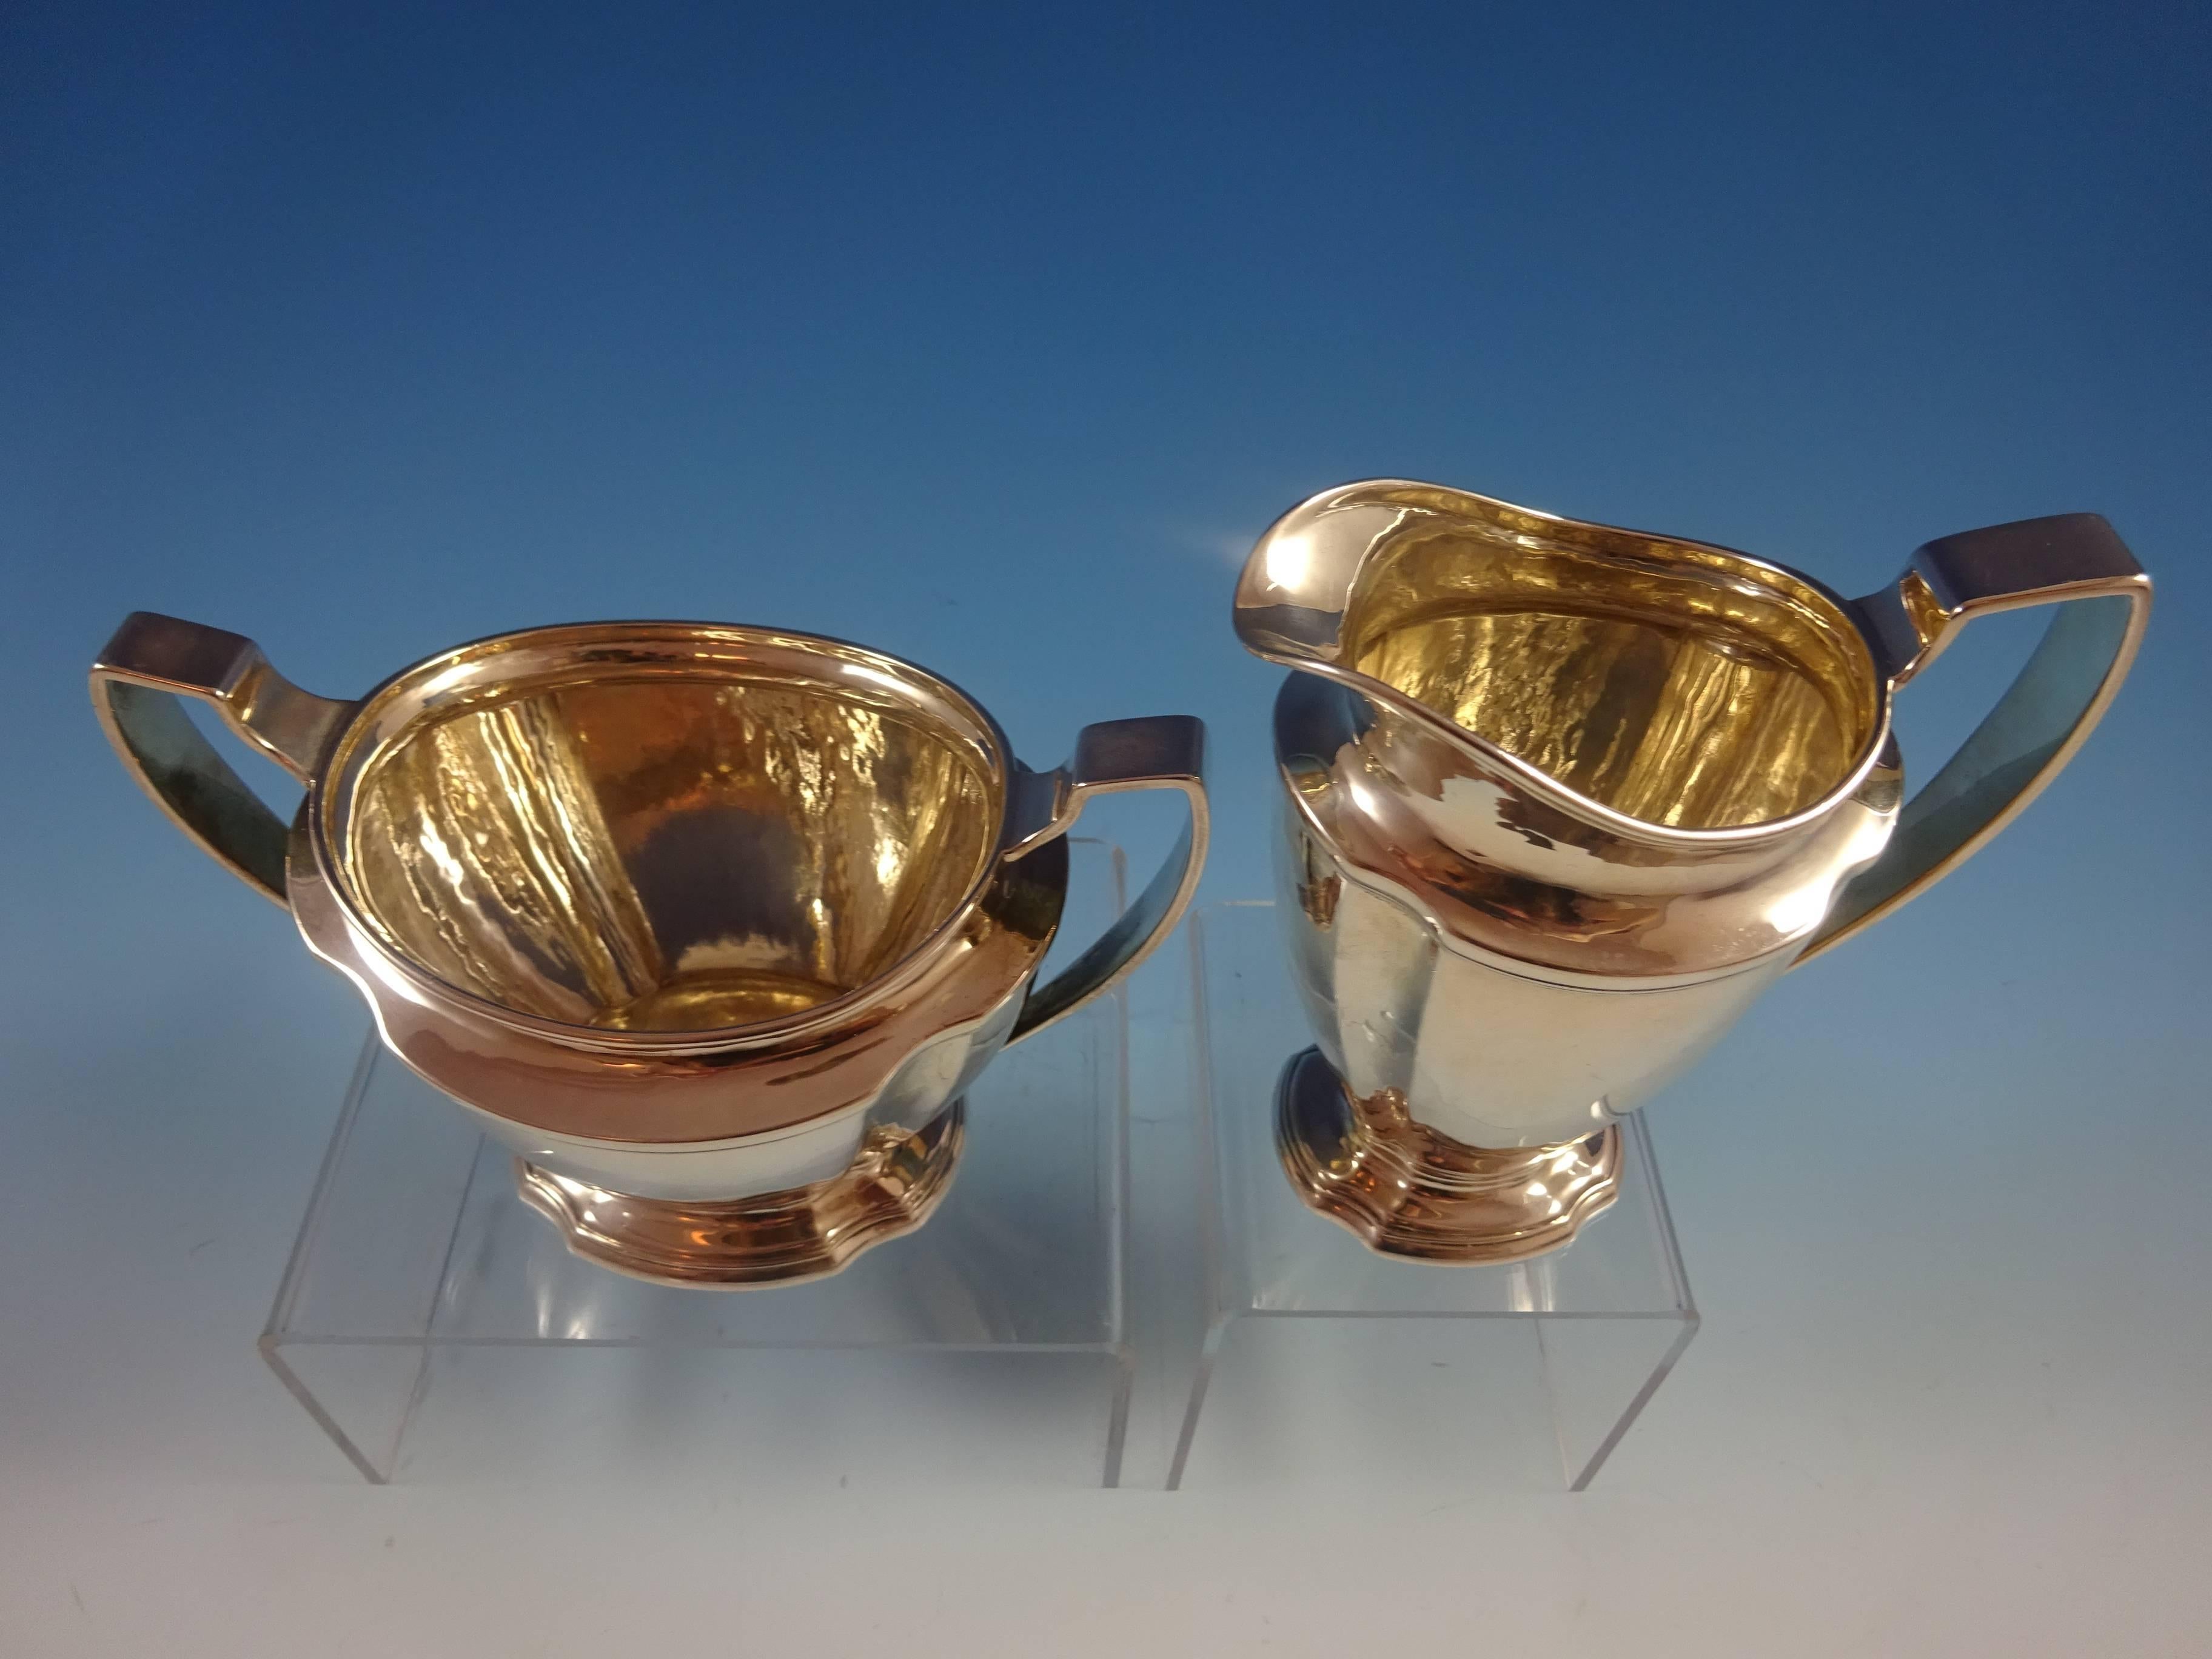 Windham by Tiffany and Co.

Windham by Tiffany and Co sterling silver sugar and creamer two-piece set. Both pieces are marked with #17861-1849 with date mark for 1907-47. The sugar bowl measures 3 3/4